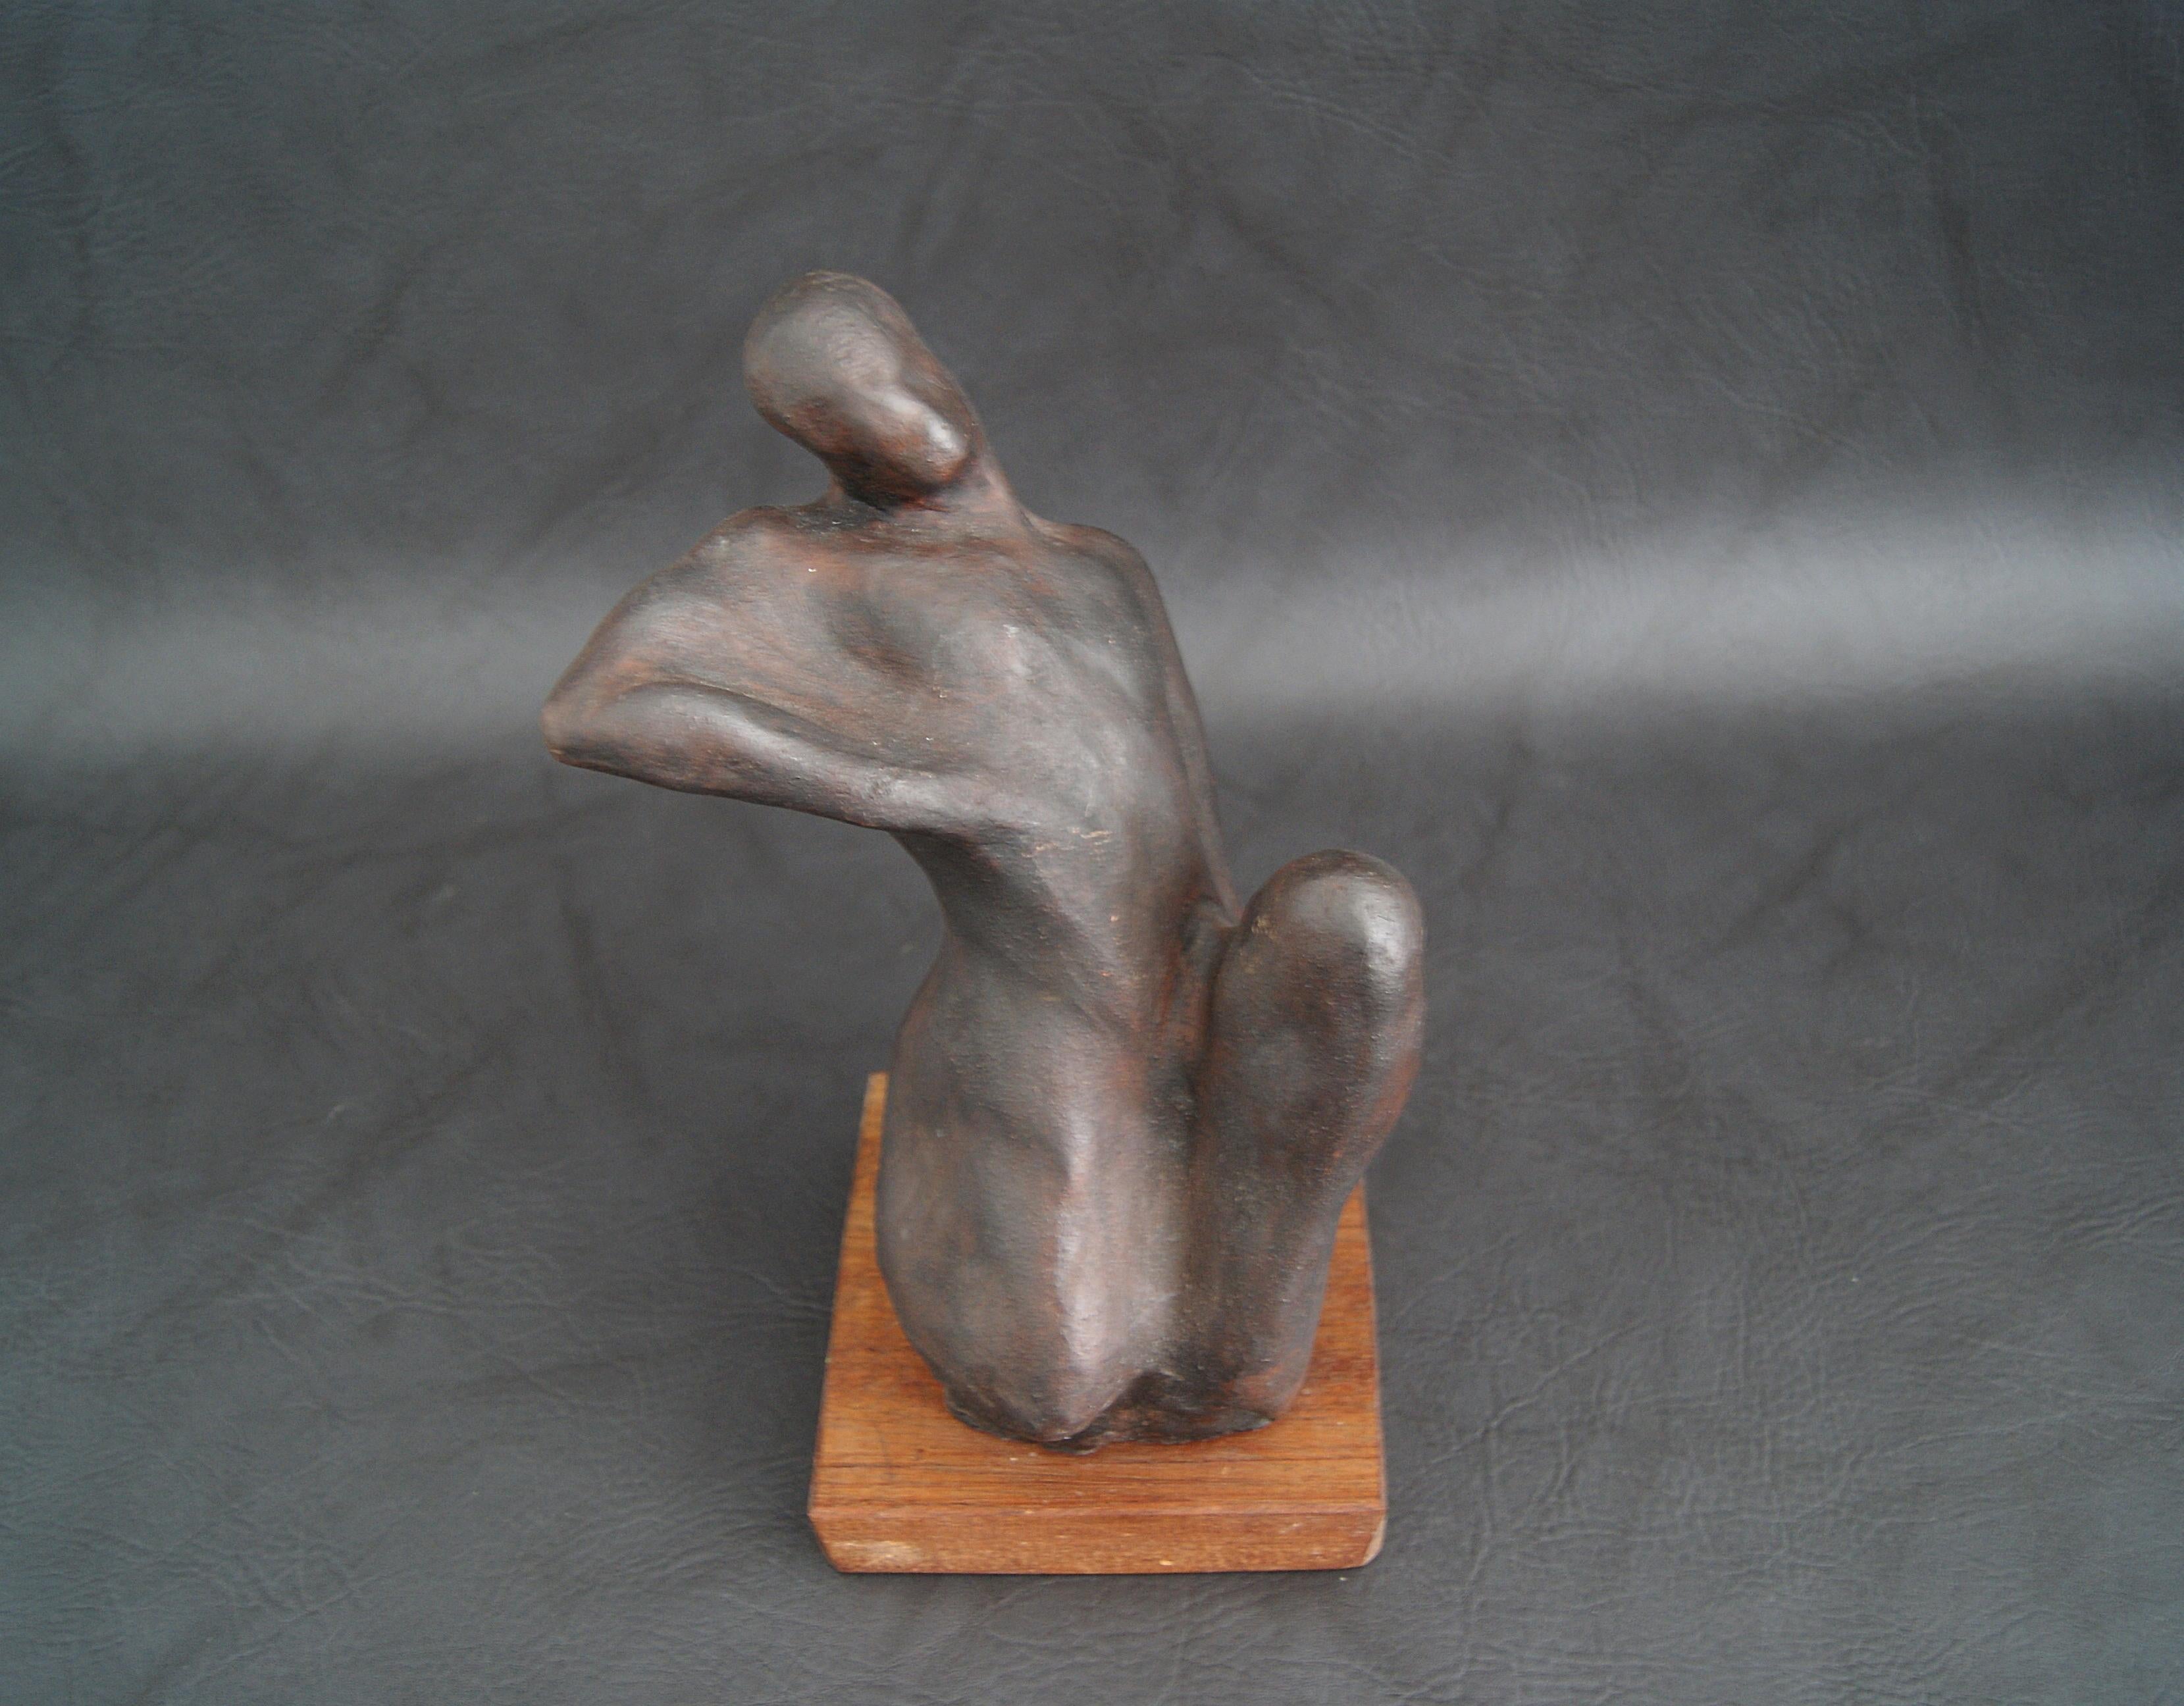 Hand-formed sculpture made of plaster of paris with patinated bronze on a wooden base. The plaster figure is from the German artist TADÄUS from the series formless body shapes from 2002. A very decorative individual piece that invites you to